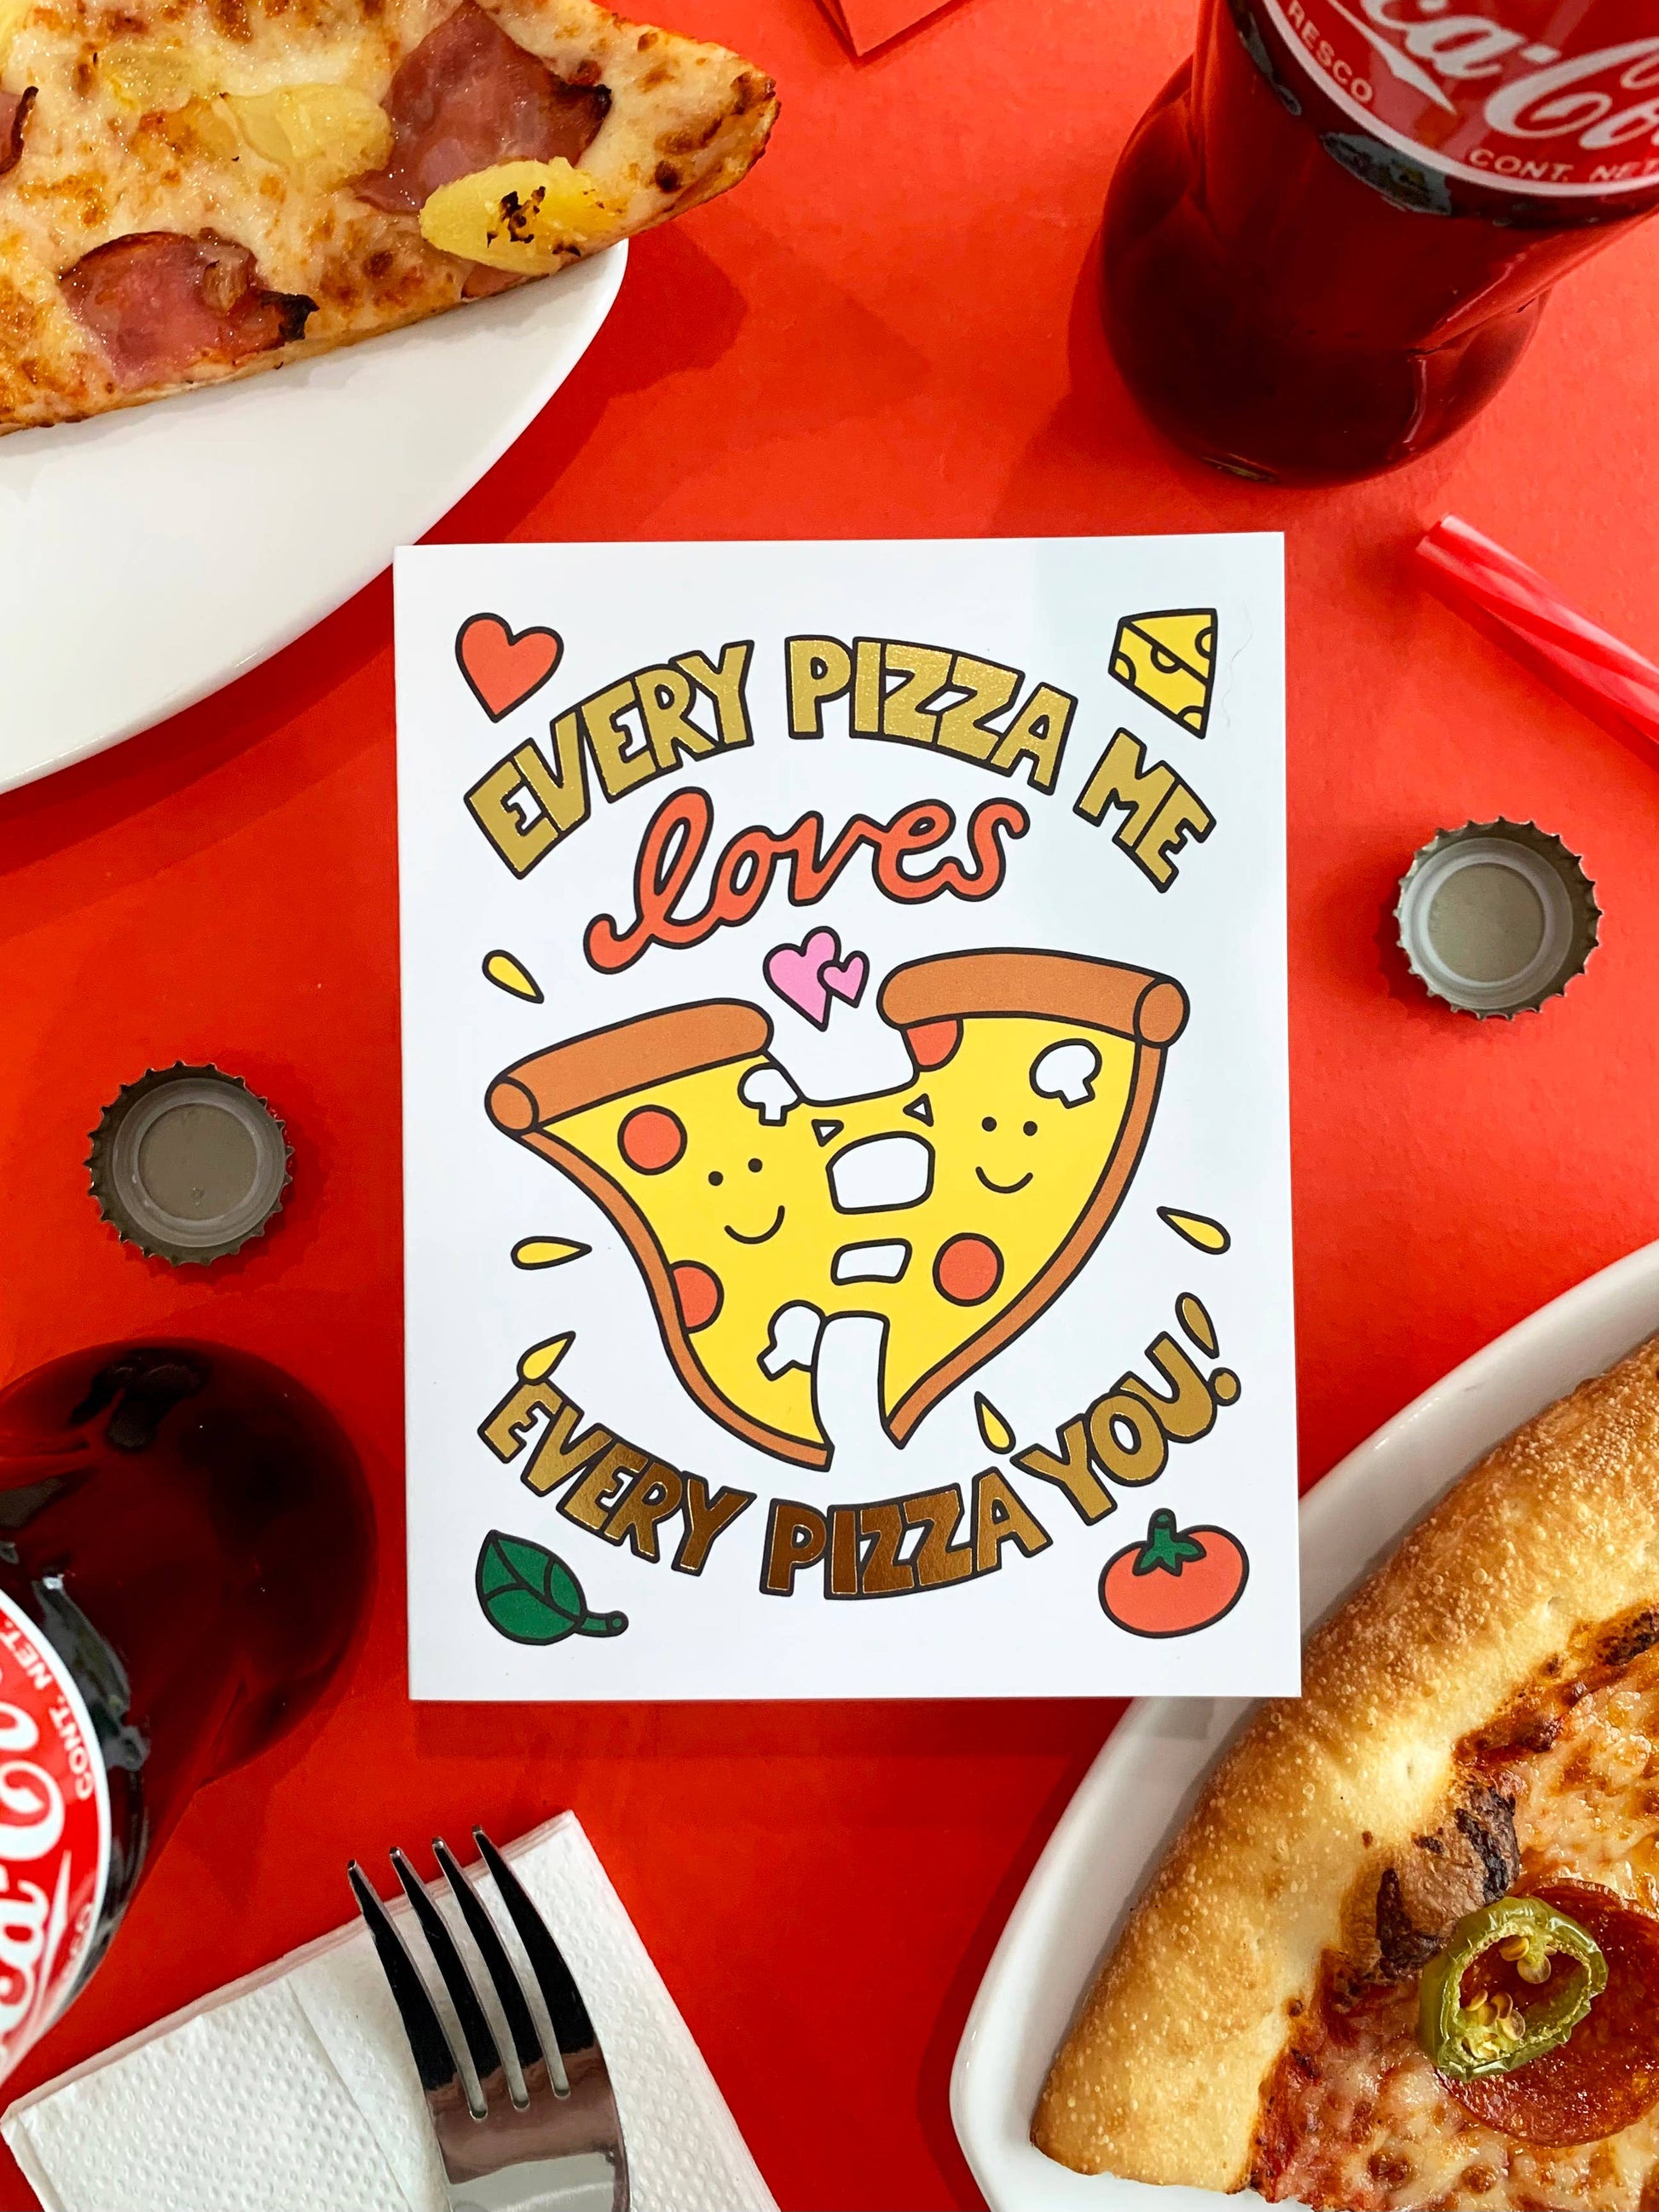 Card that reads" Every PIzza Me Loves Every PIzza You!"